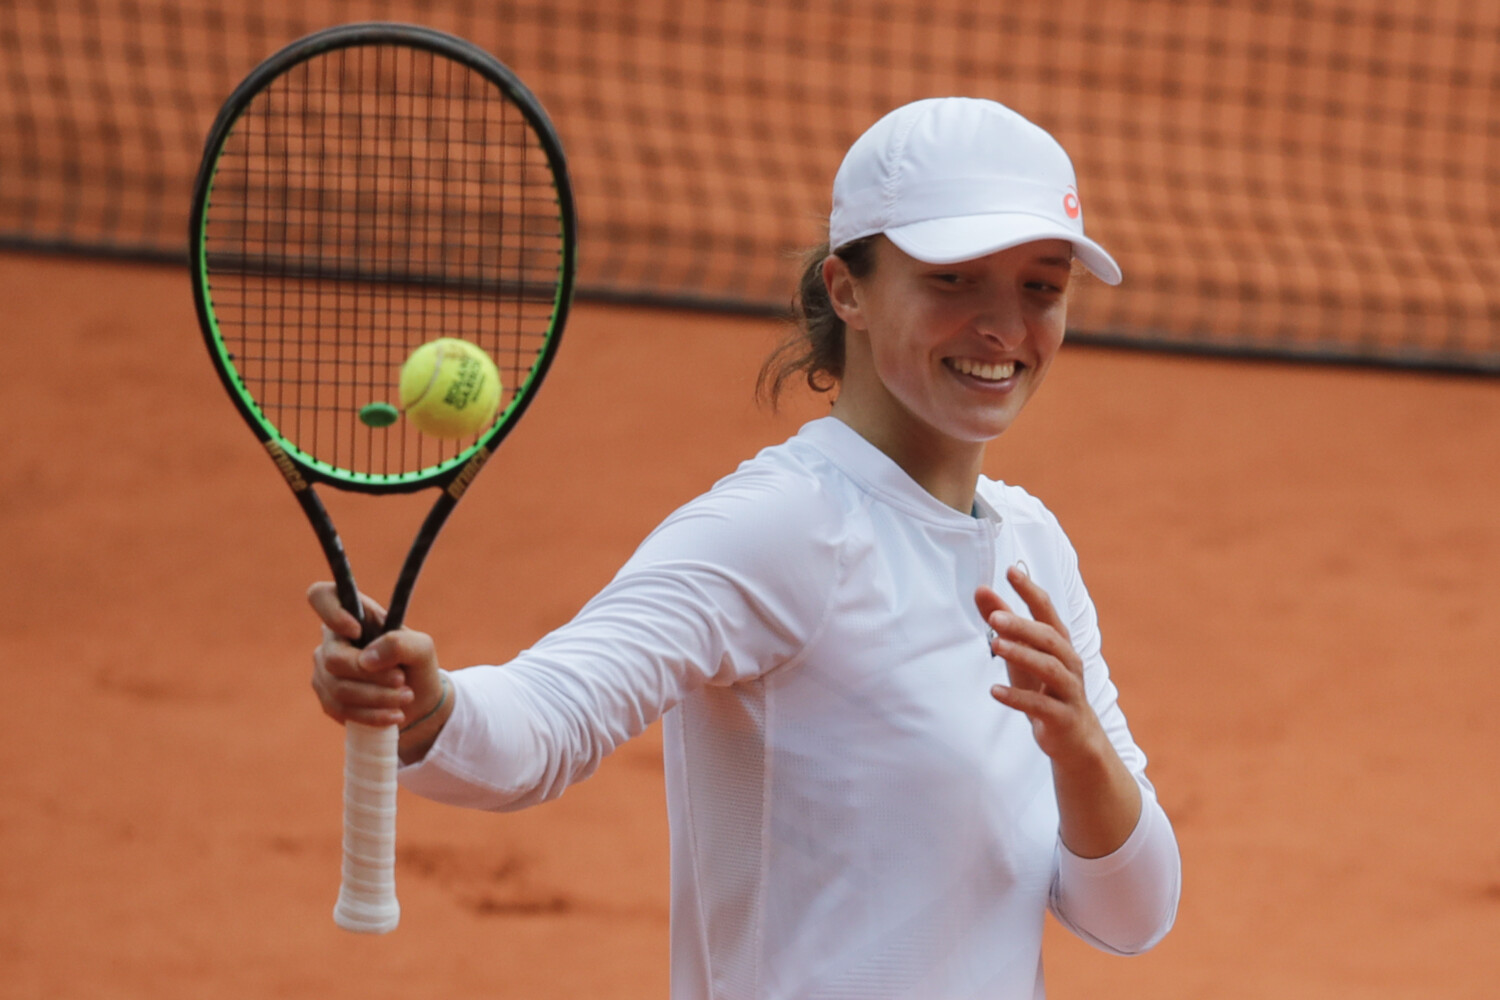 Swiatek primed for another shot at French Open title as semis loom